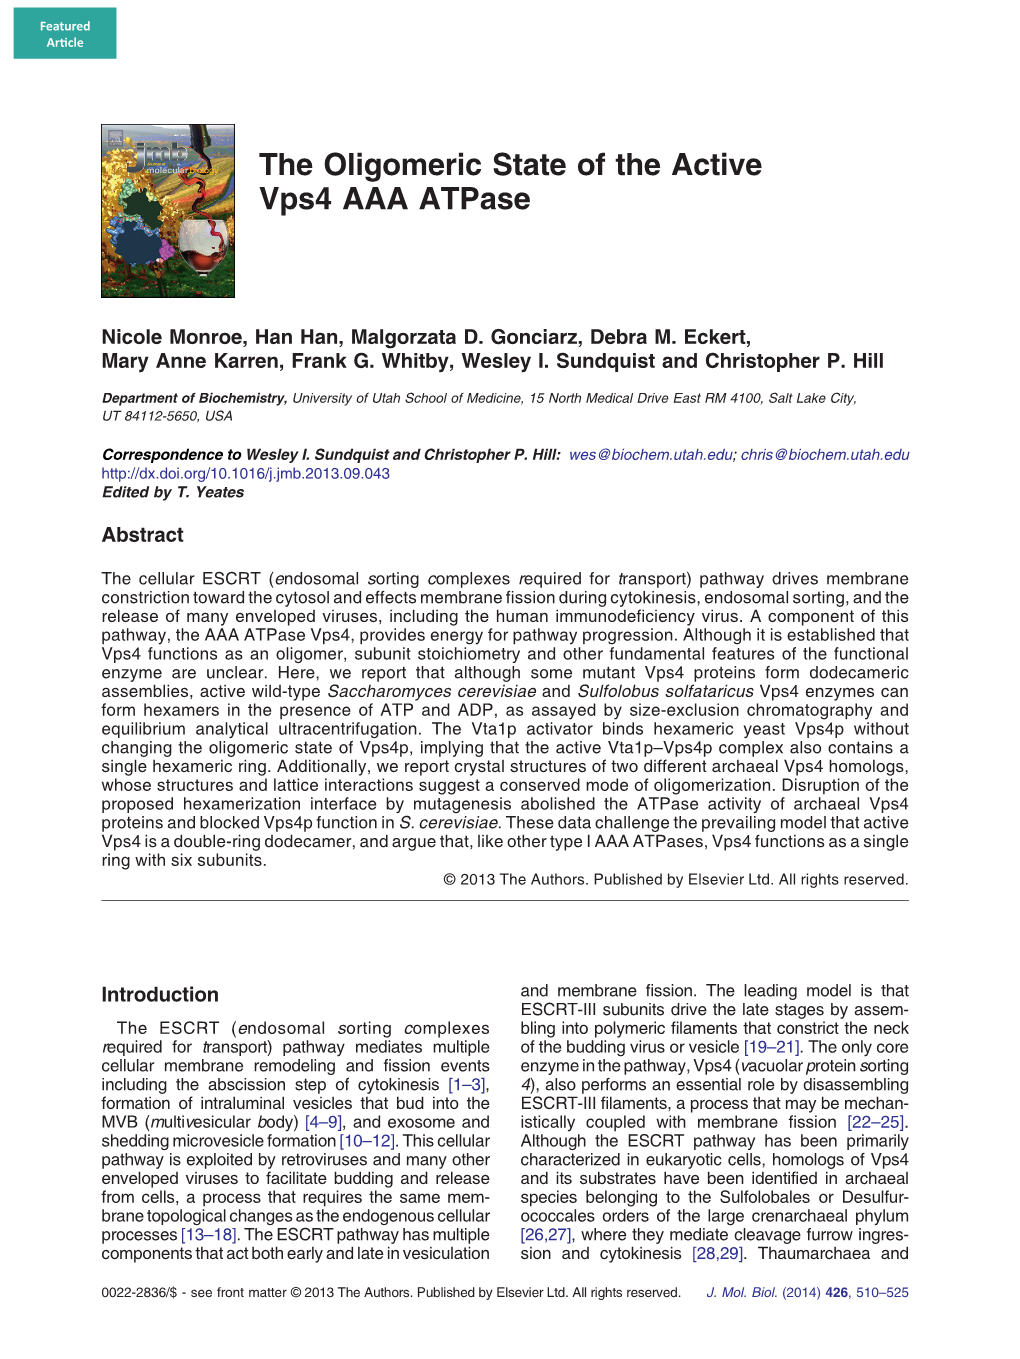 The Oligomeric State of the Active Vps4 AAA Atpase